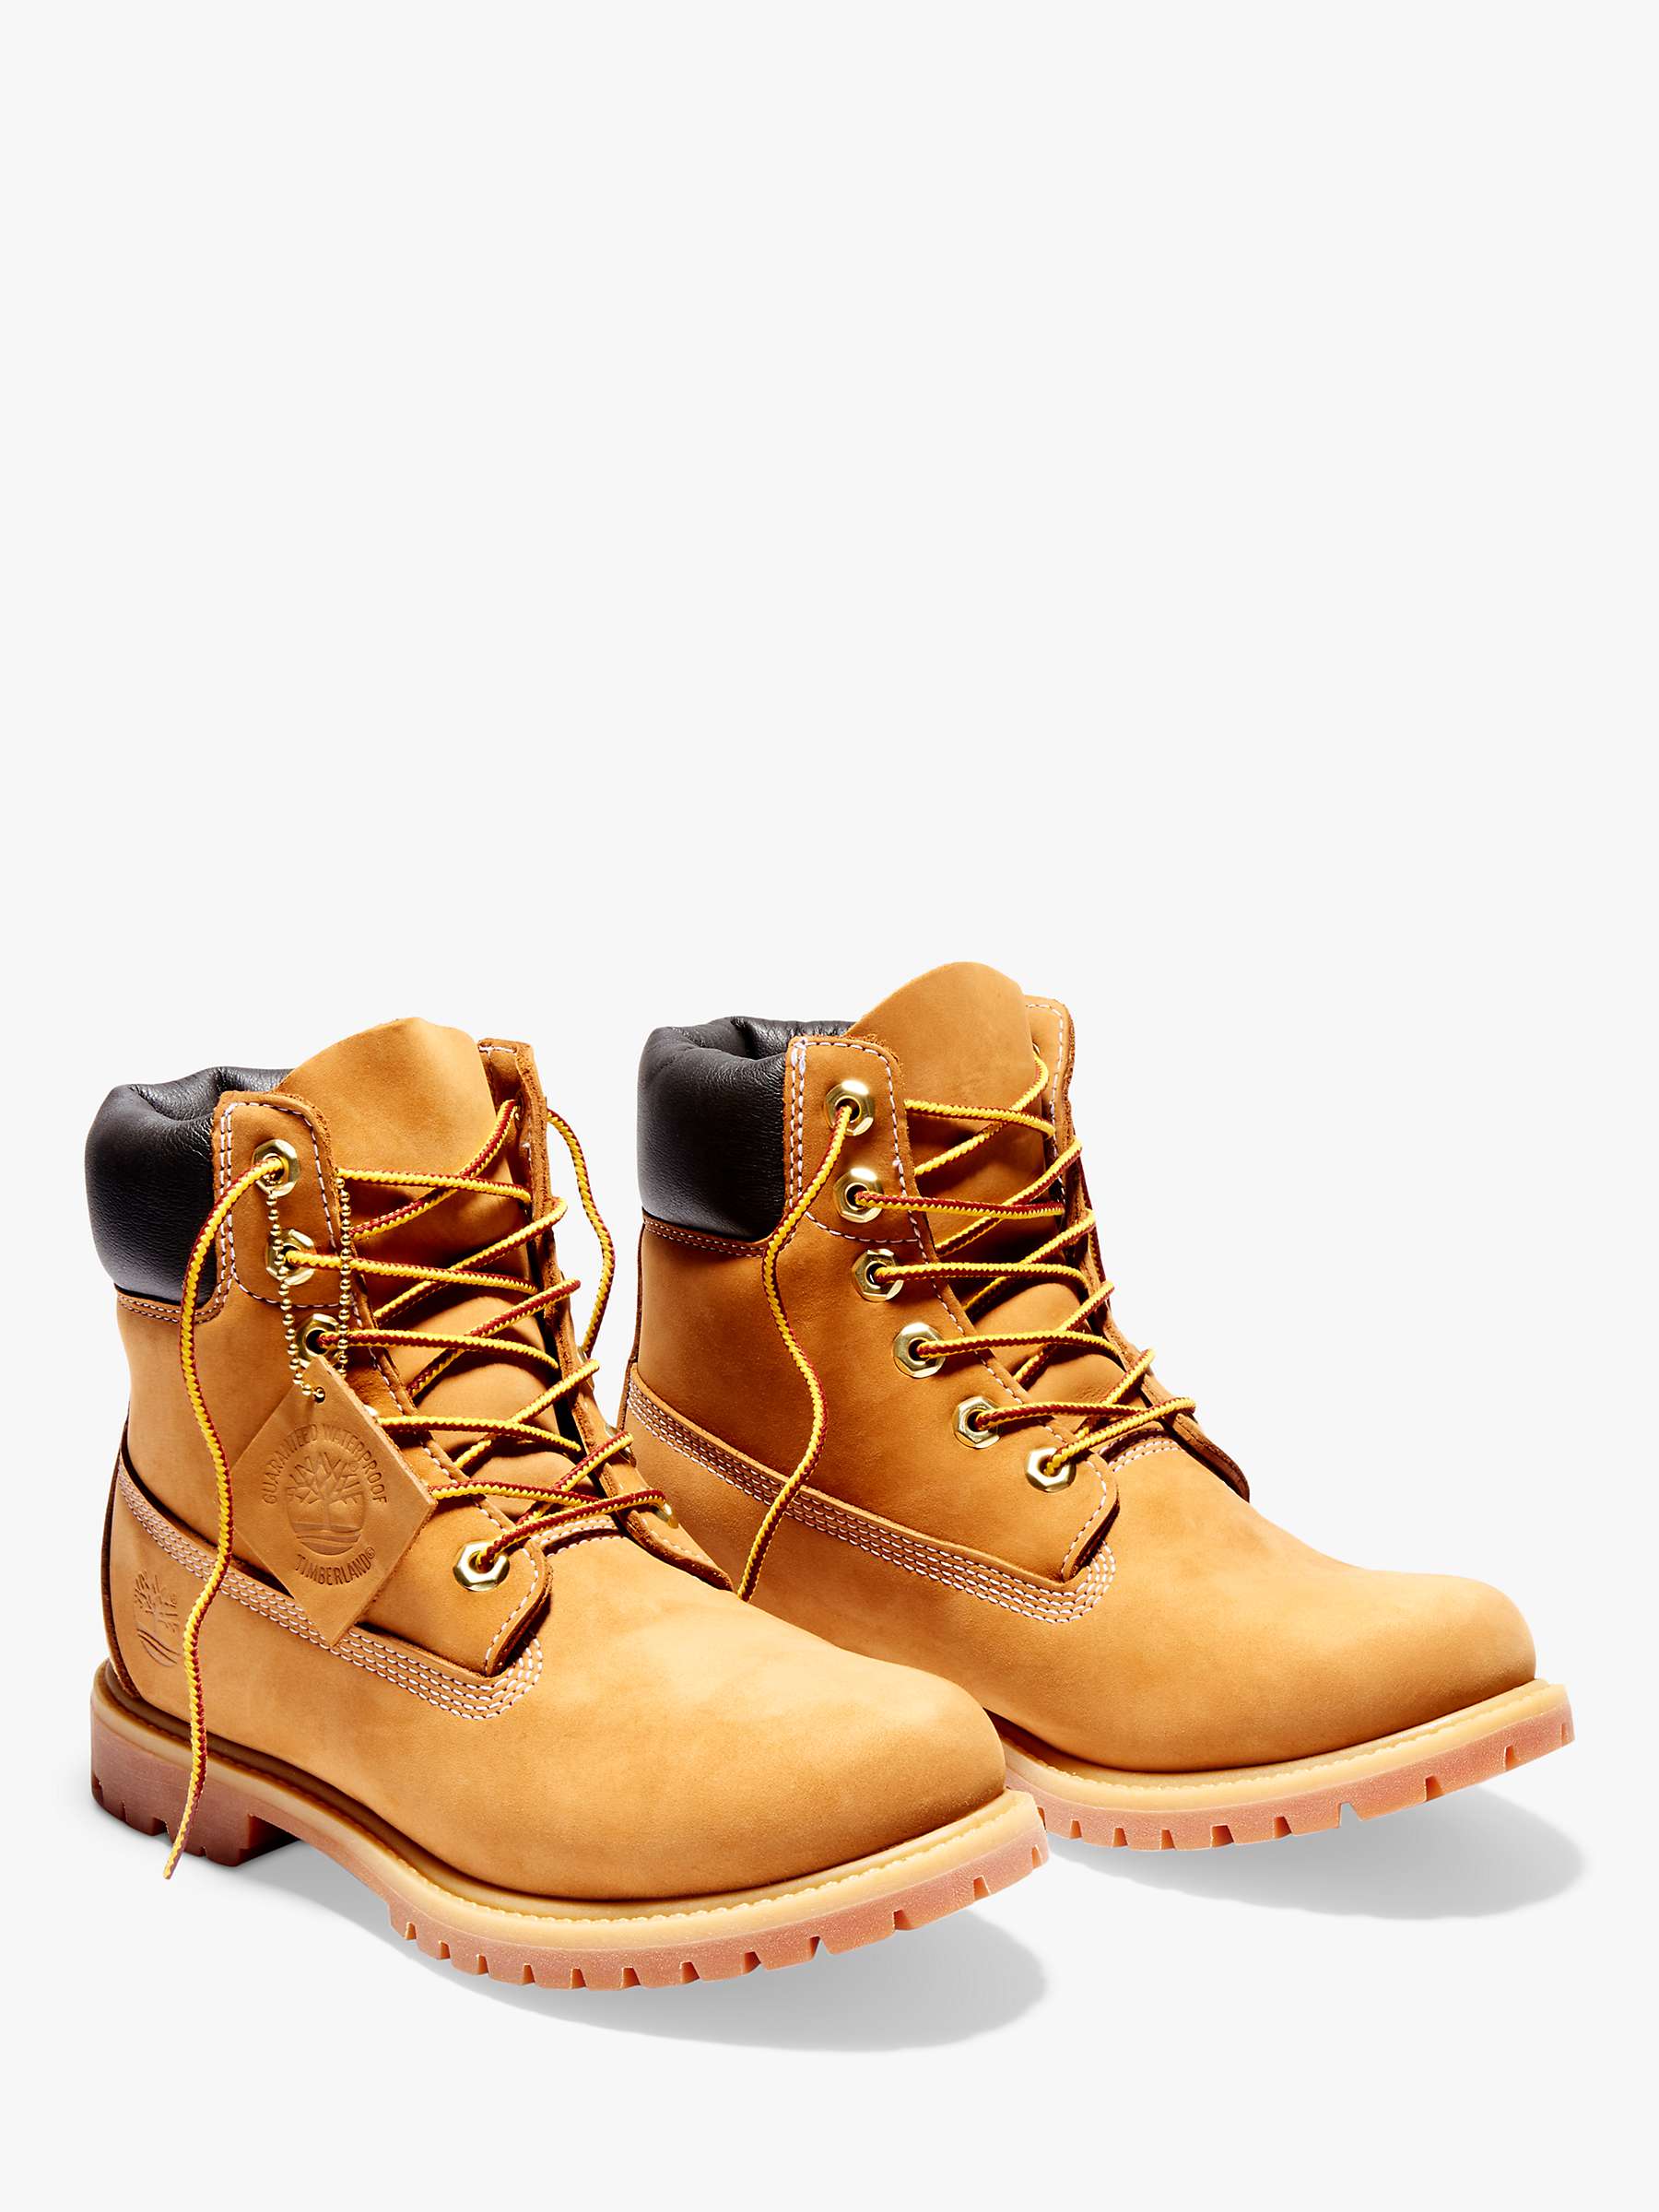 Cambiarse de ropa Razón estante Timberland Classic 6 Inch Waterproof Leather Boots, Wheat at John Lewis &  Partners